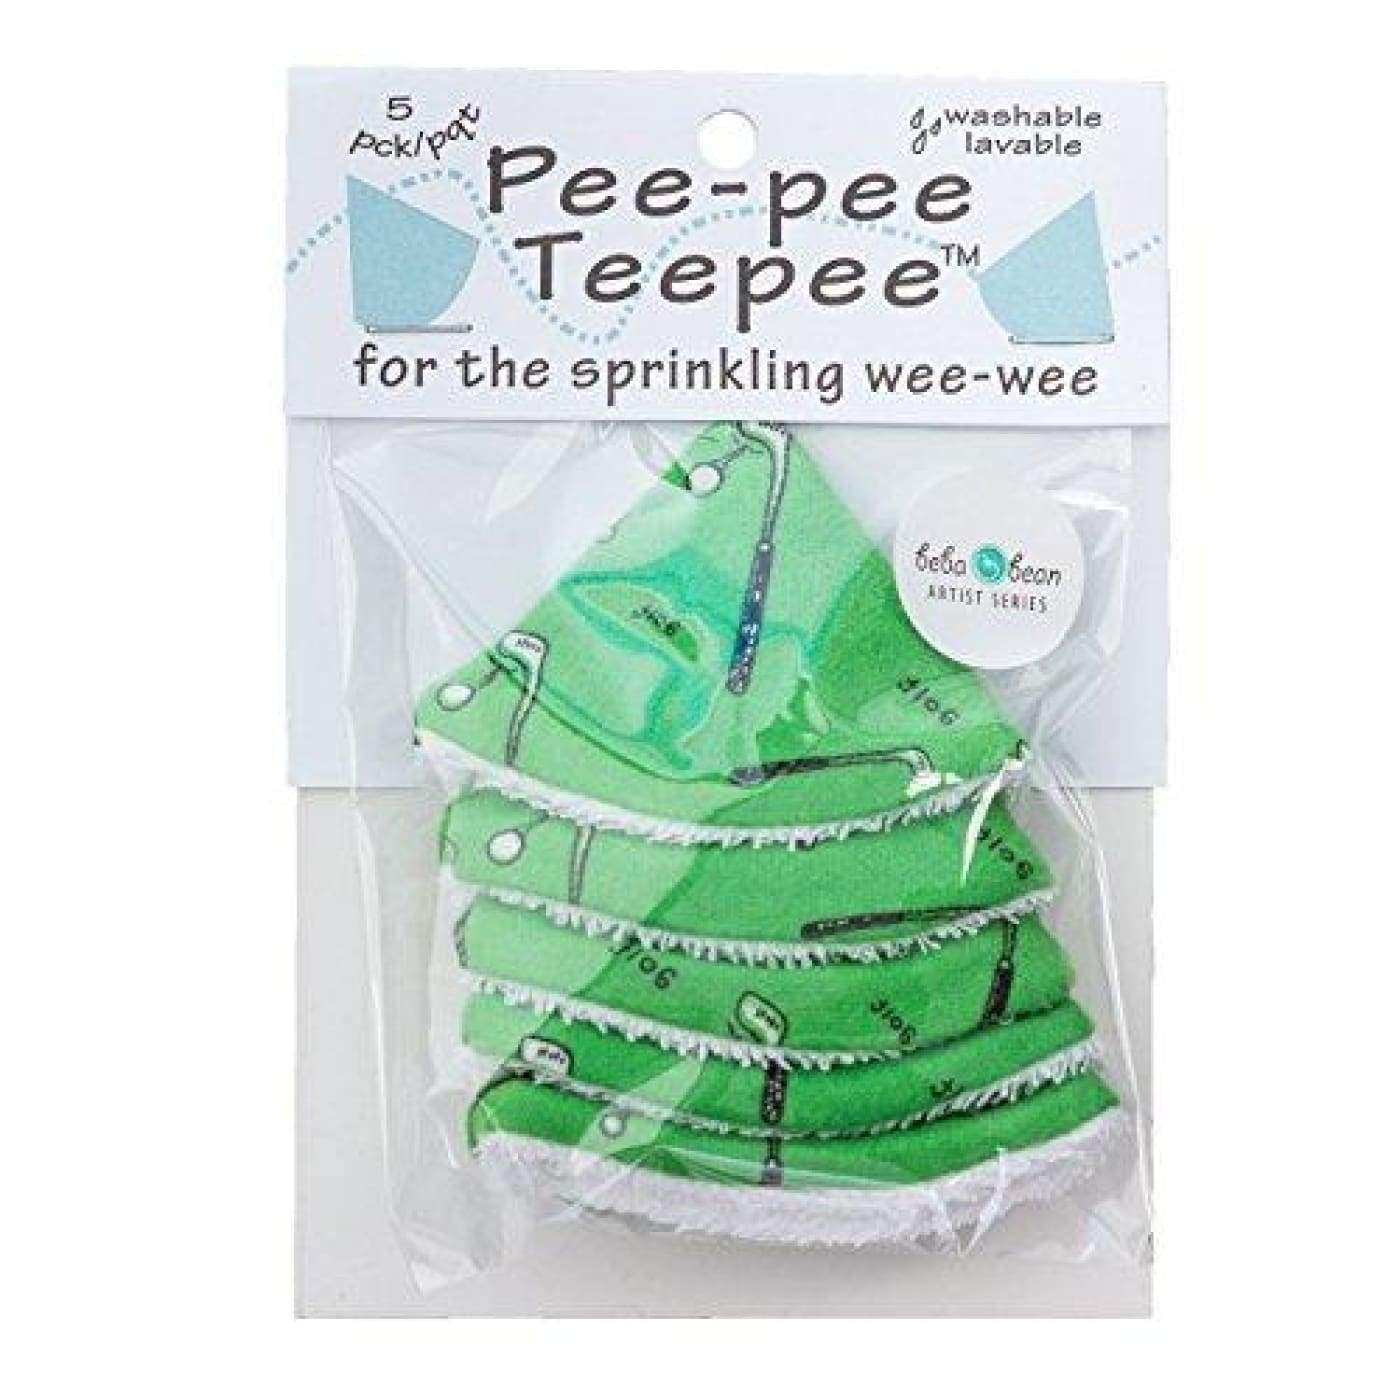 Pee-pee Teepee - Golf - BATHTIME & CHANGING - NAPPIES/WIPES/ACCESSORIES